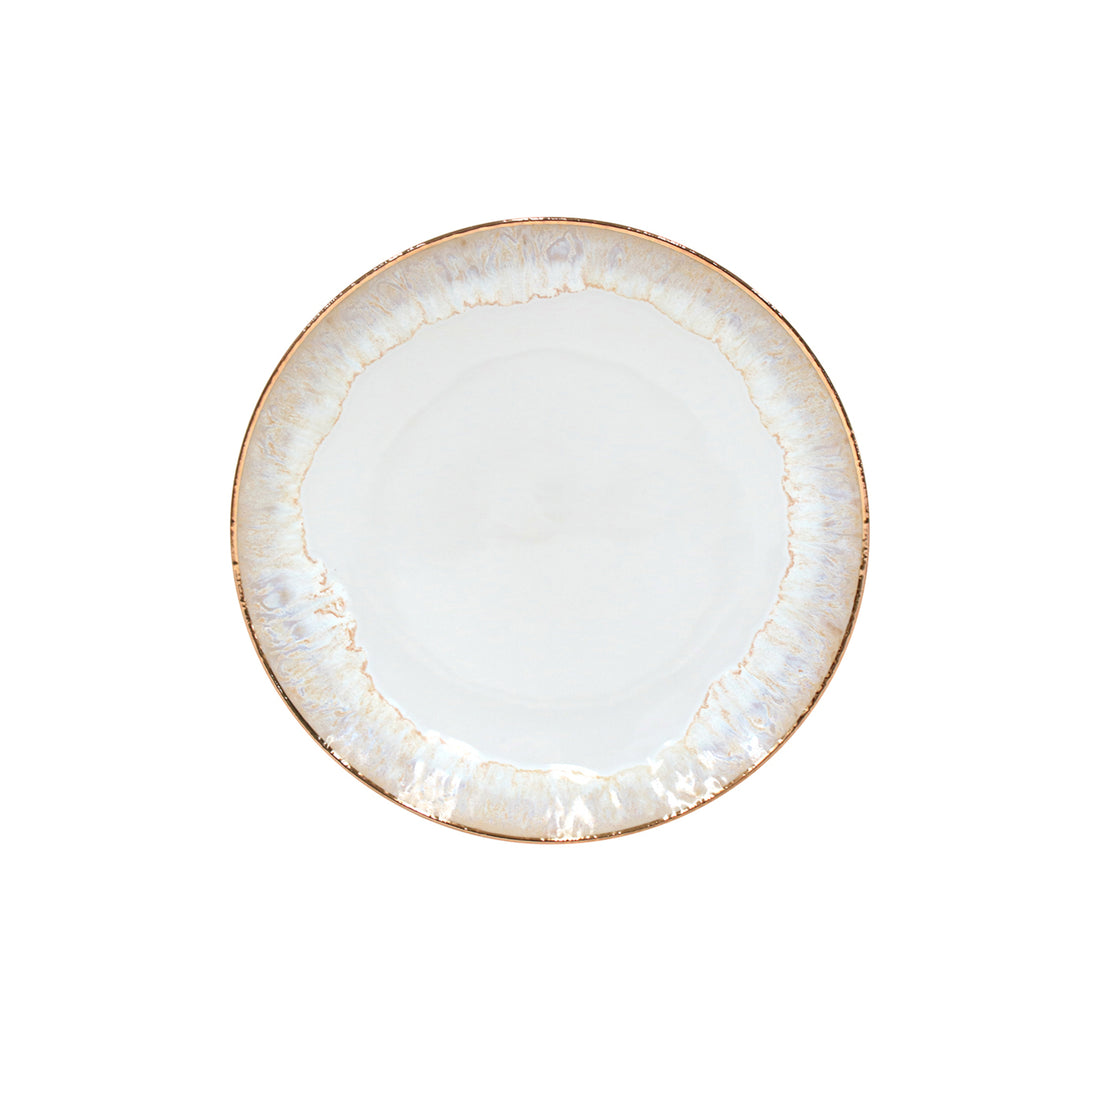 Casafina Taormina White and Gold Dinner Plate